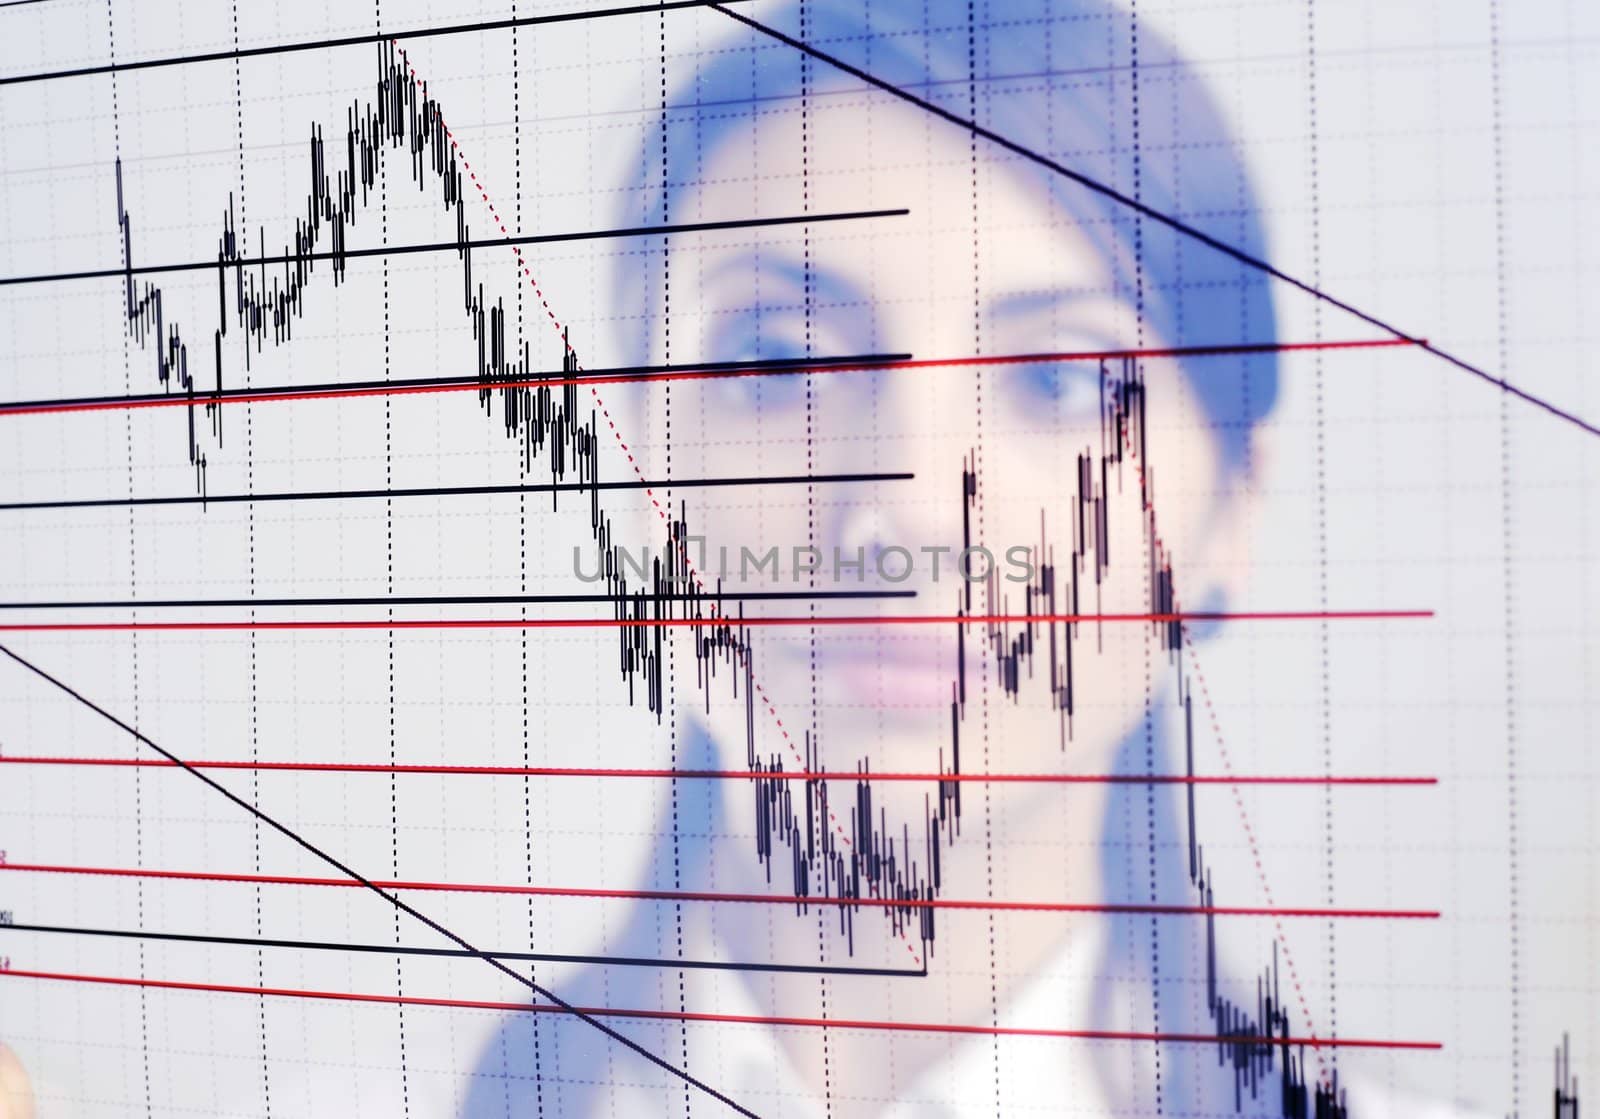 The businesswoman looks at the chart printed on a transparent material